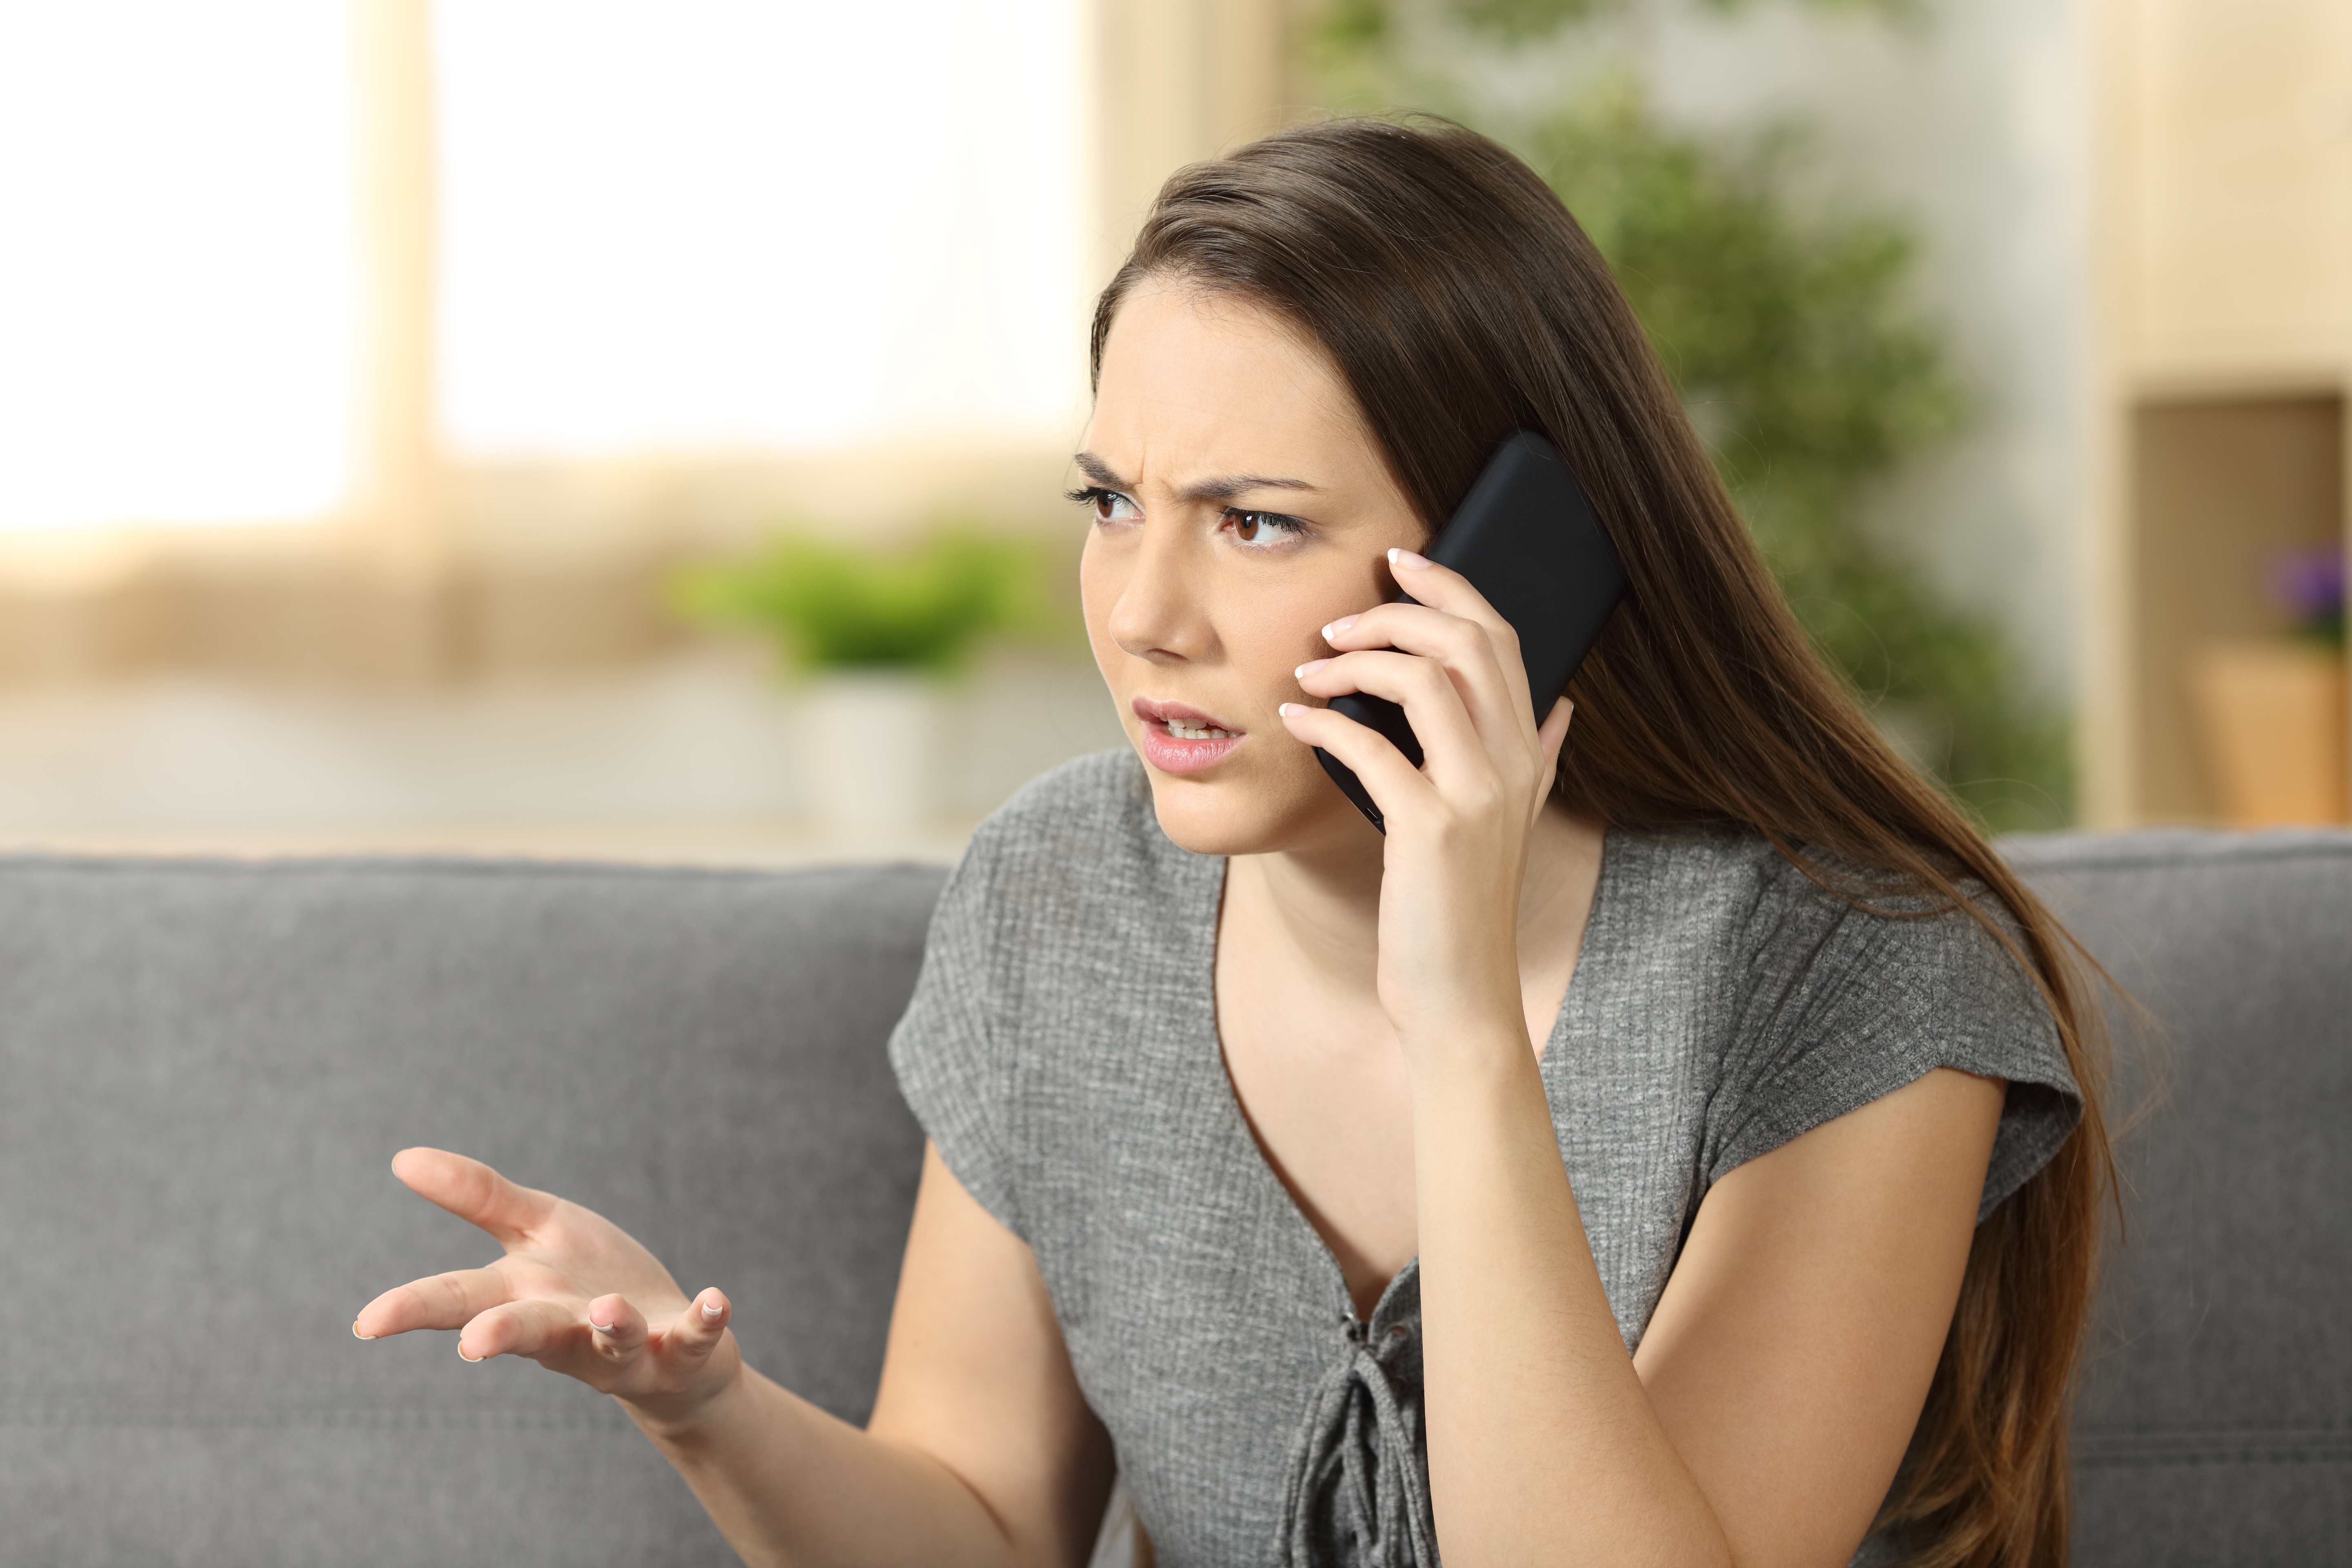 An angry woman talking on her phone | Source: Shutterstock